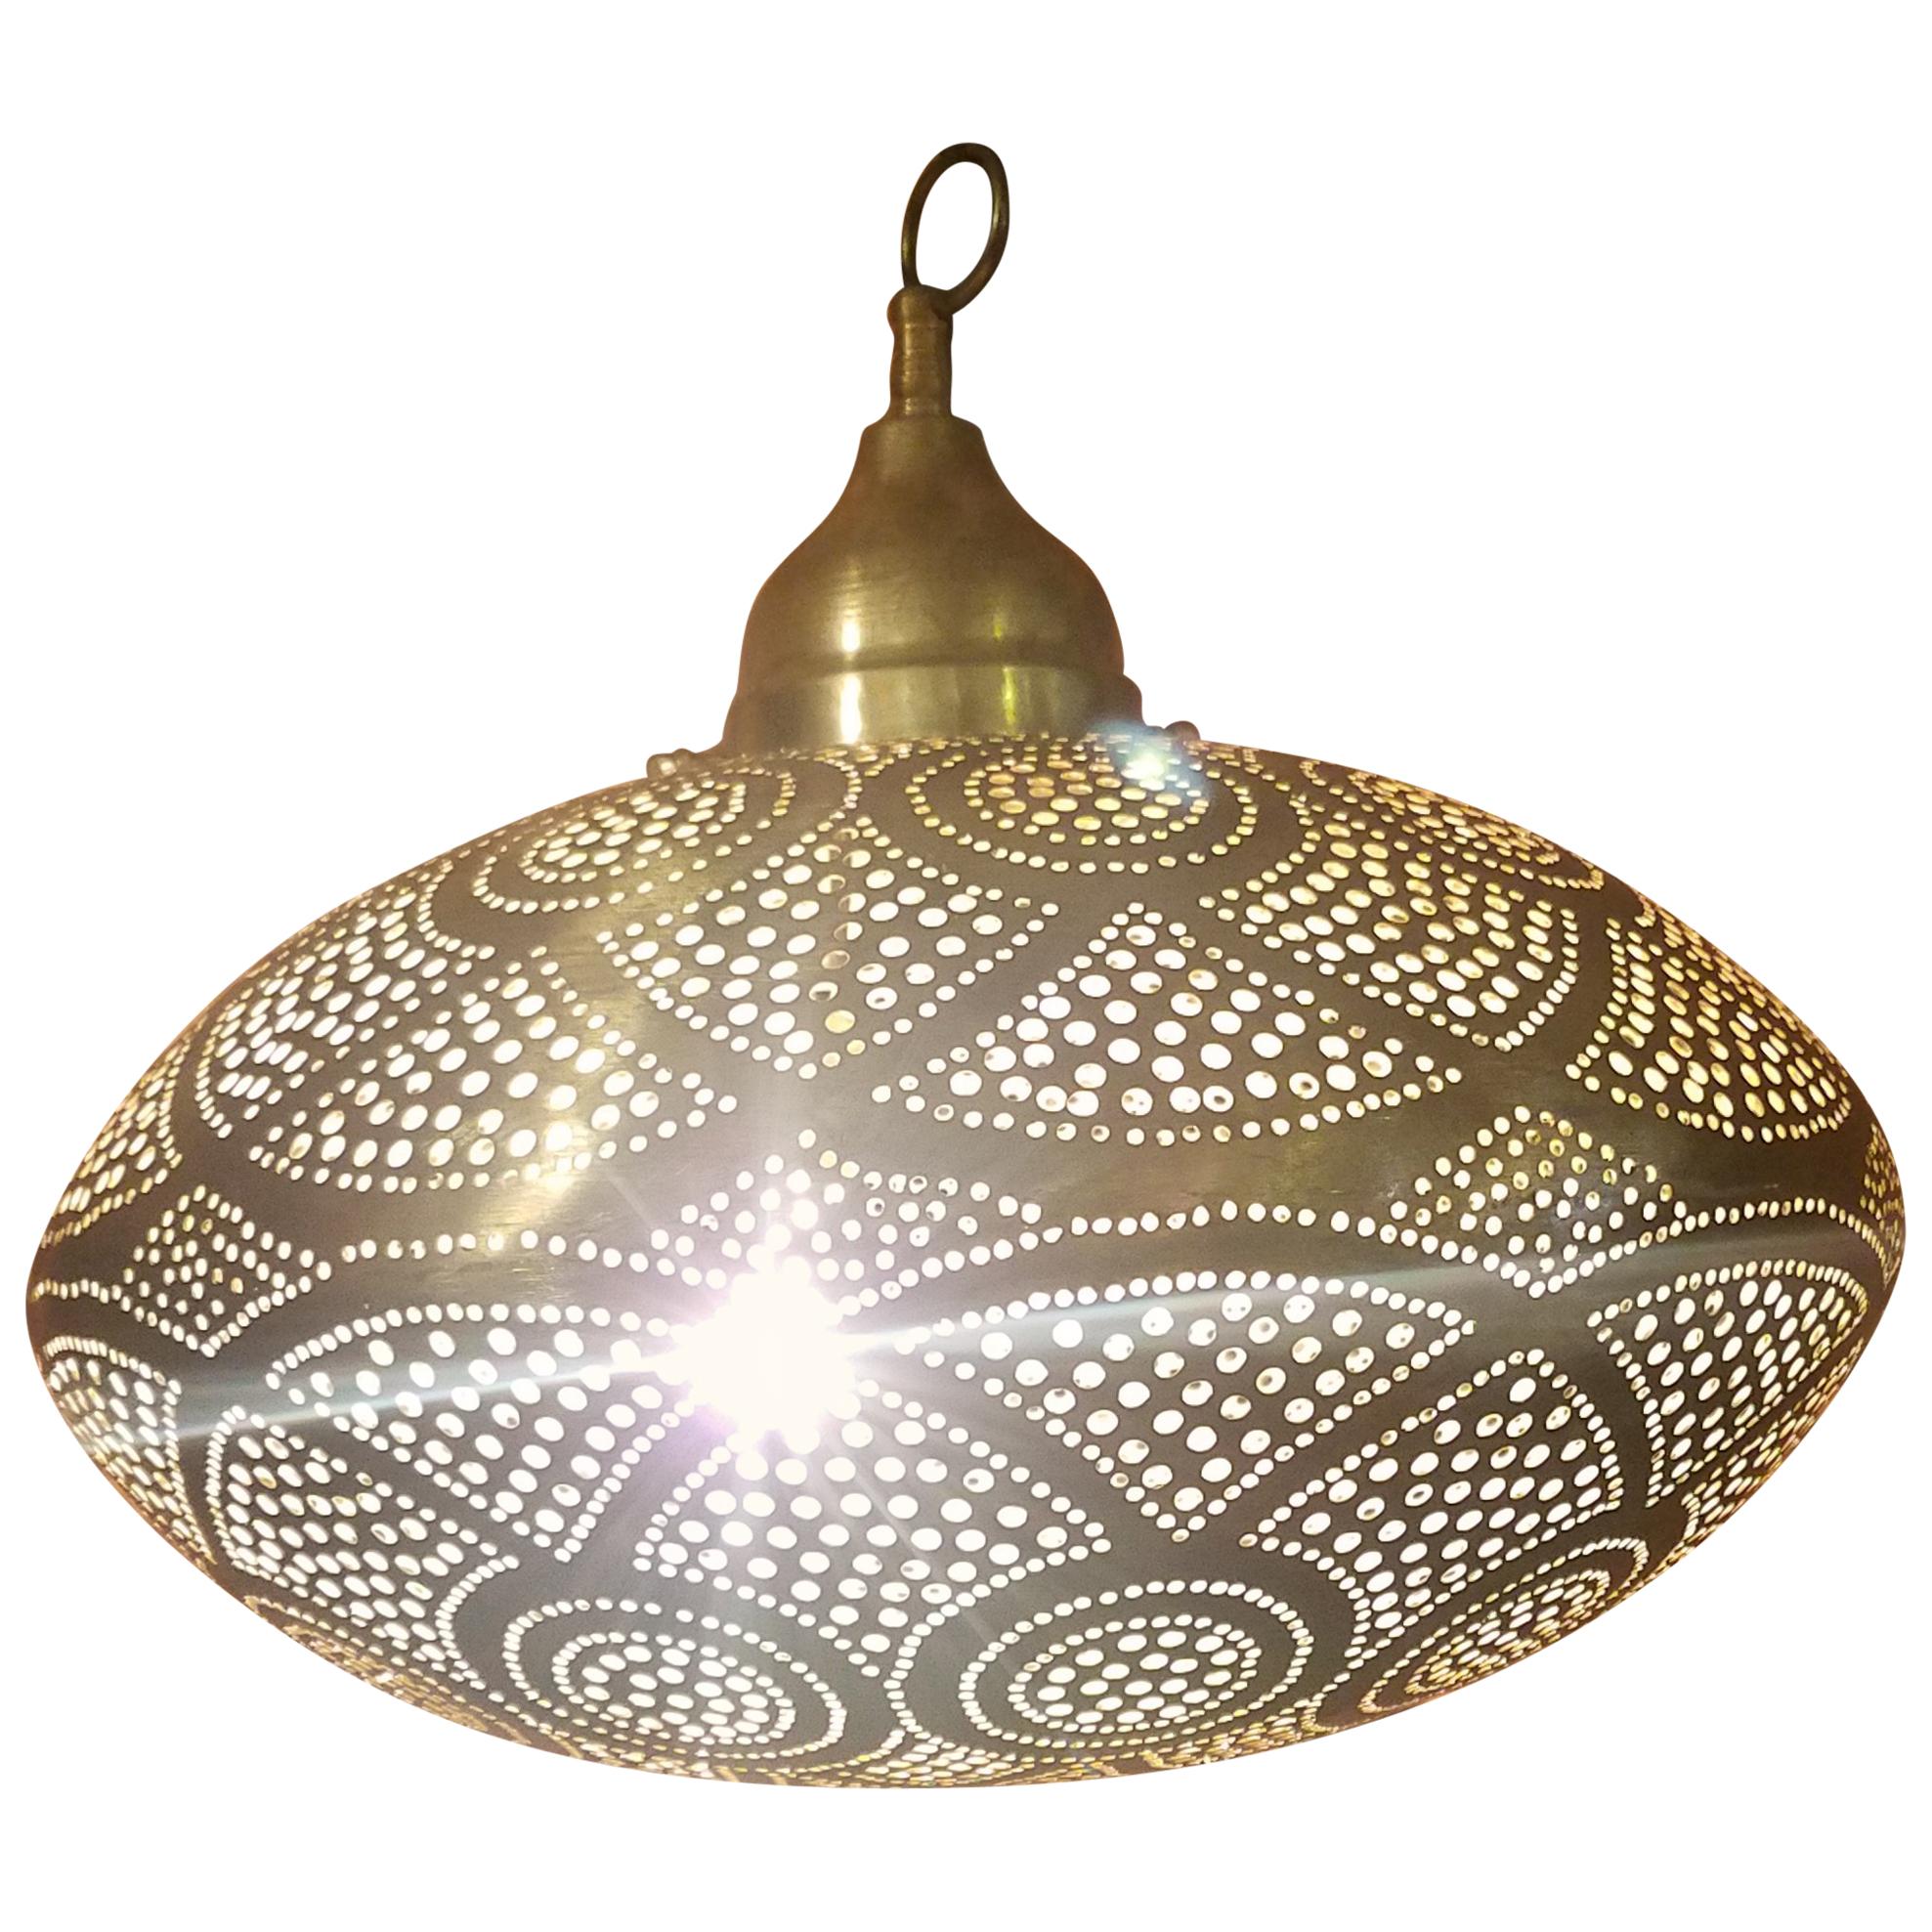 Intricate Moroccan Copper Wall or Ceiling Lamp or Lantern, Large Secoupe Shape For Sale